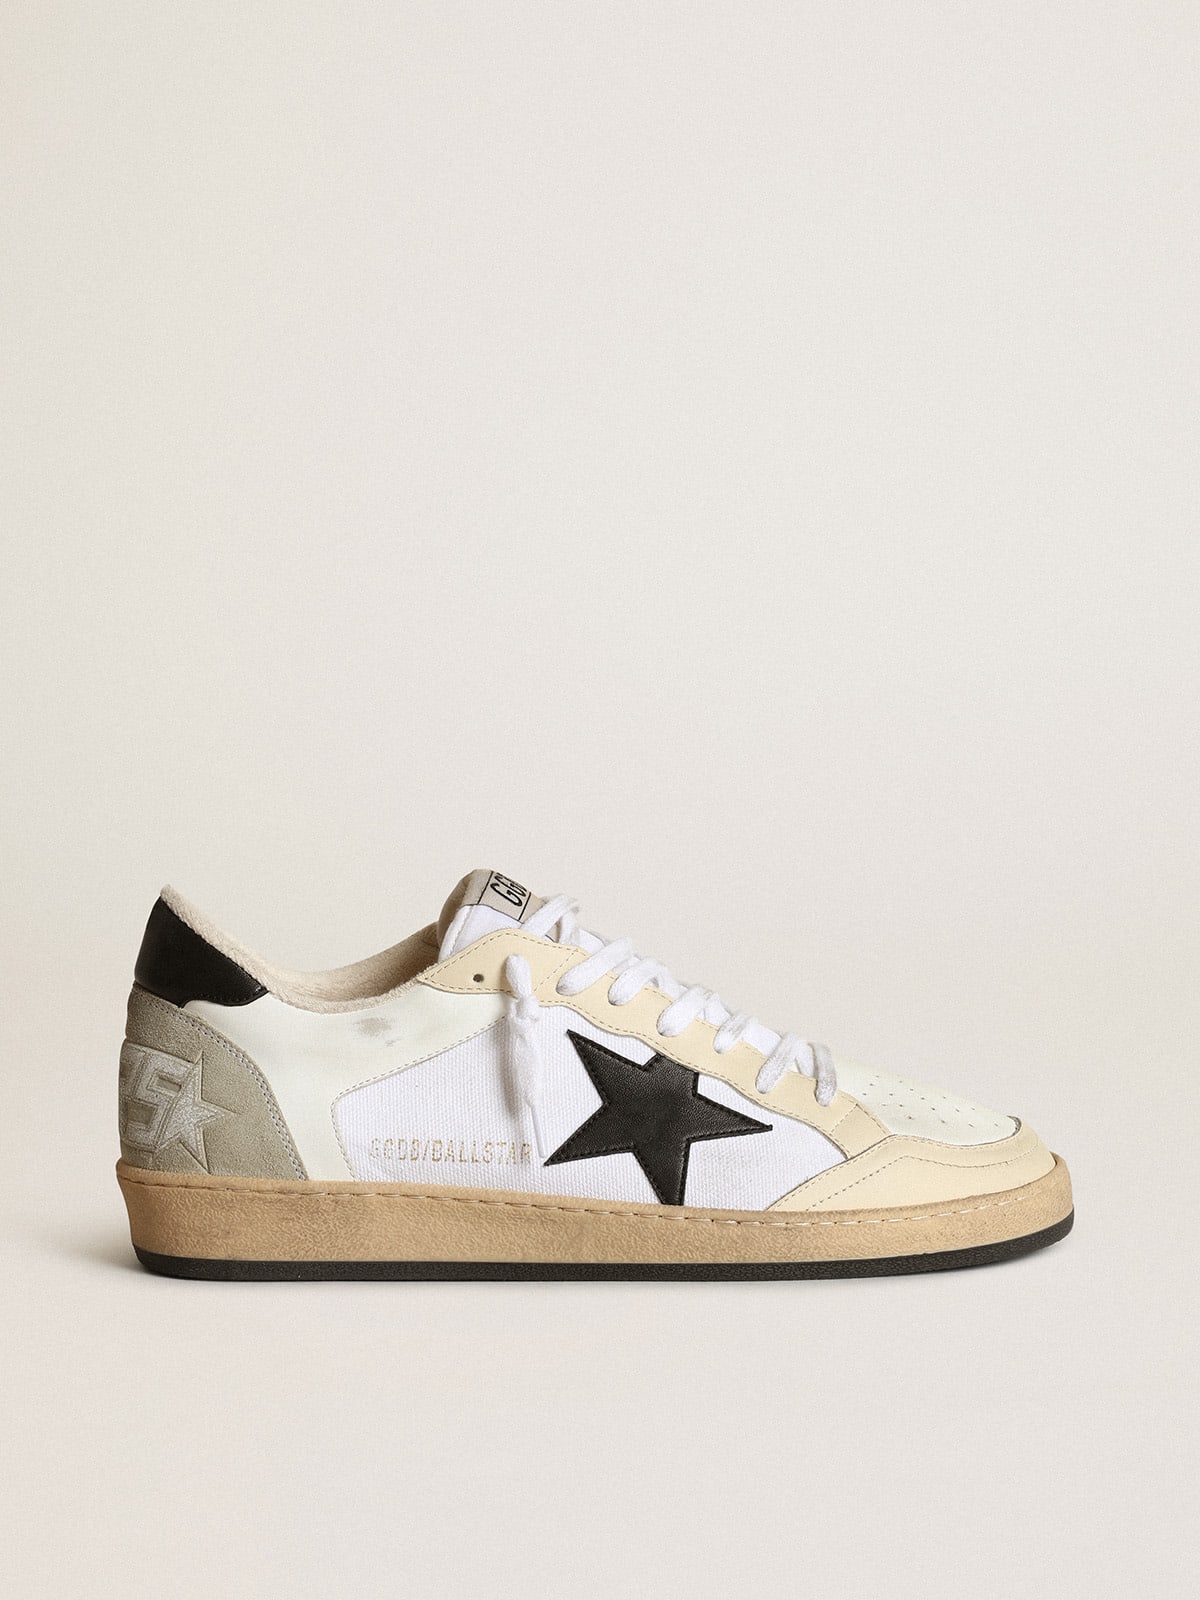 Men's Ball Star sneakers in white canvas and leather with ivory leather inserts and black nappa leather star